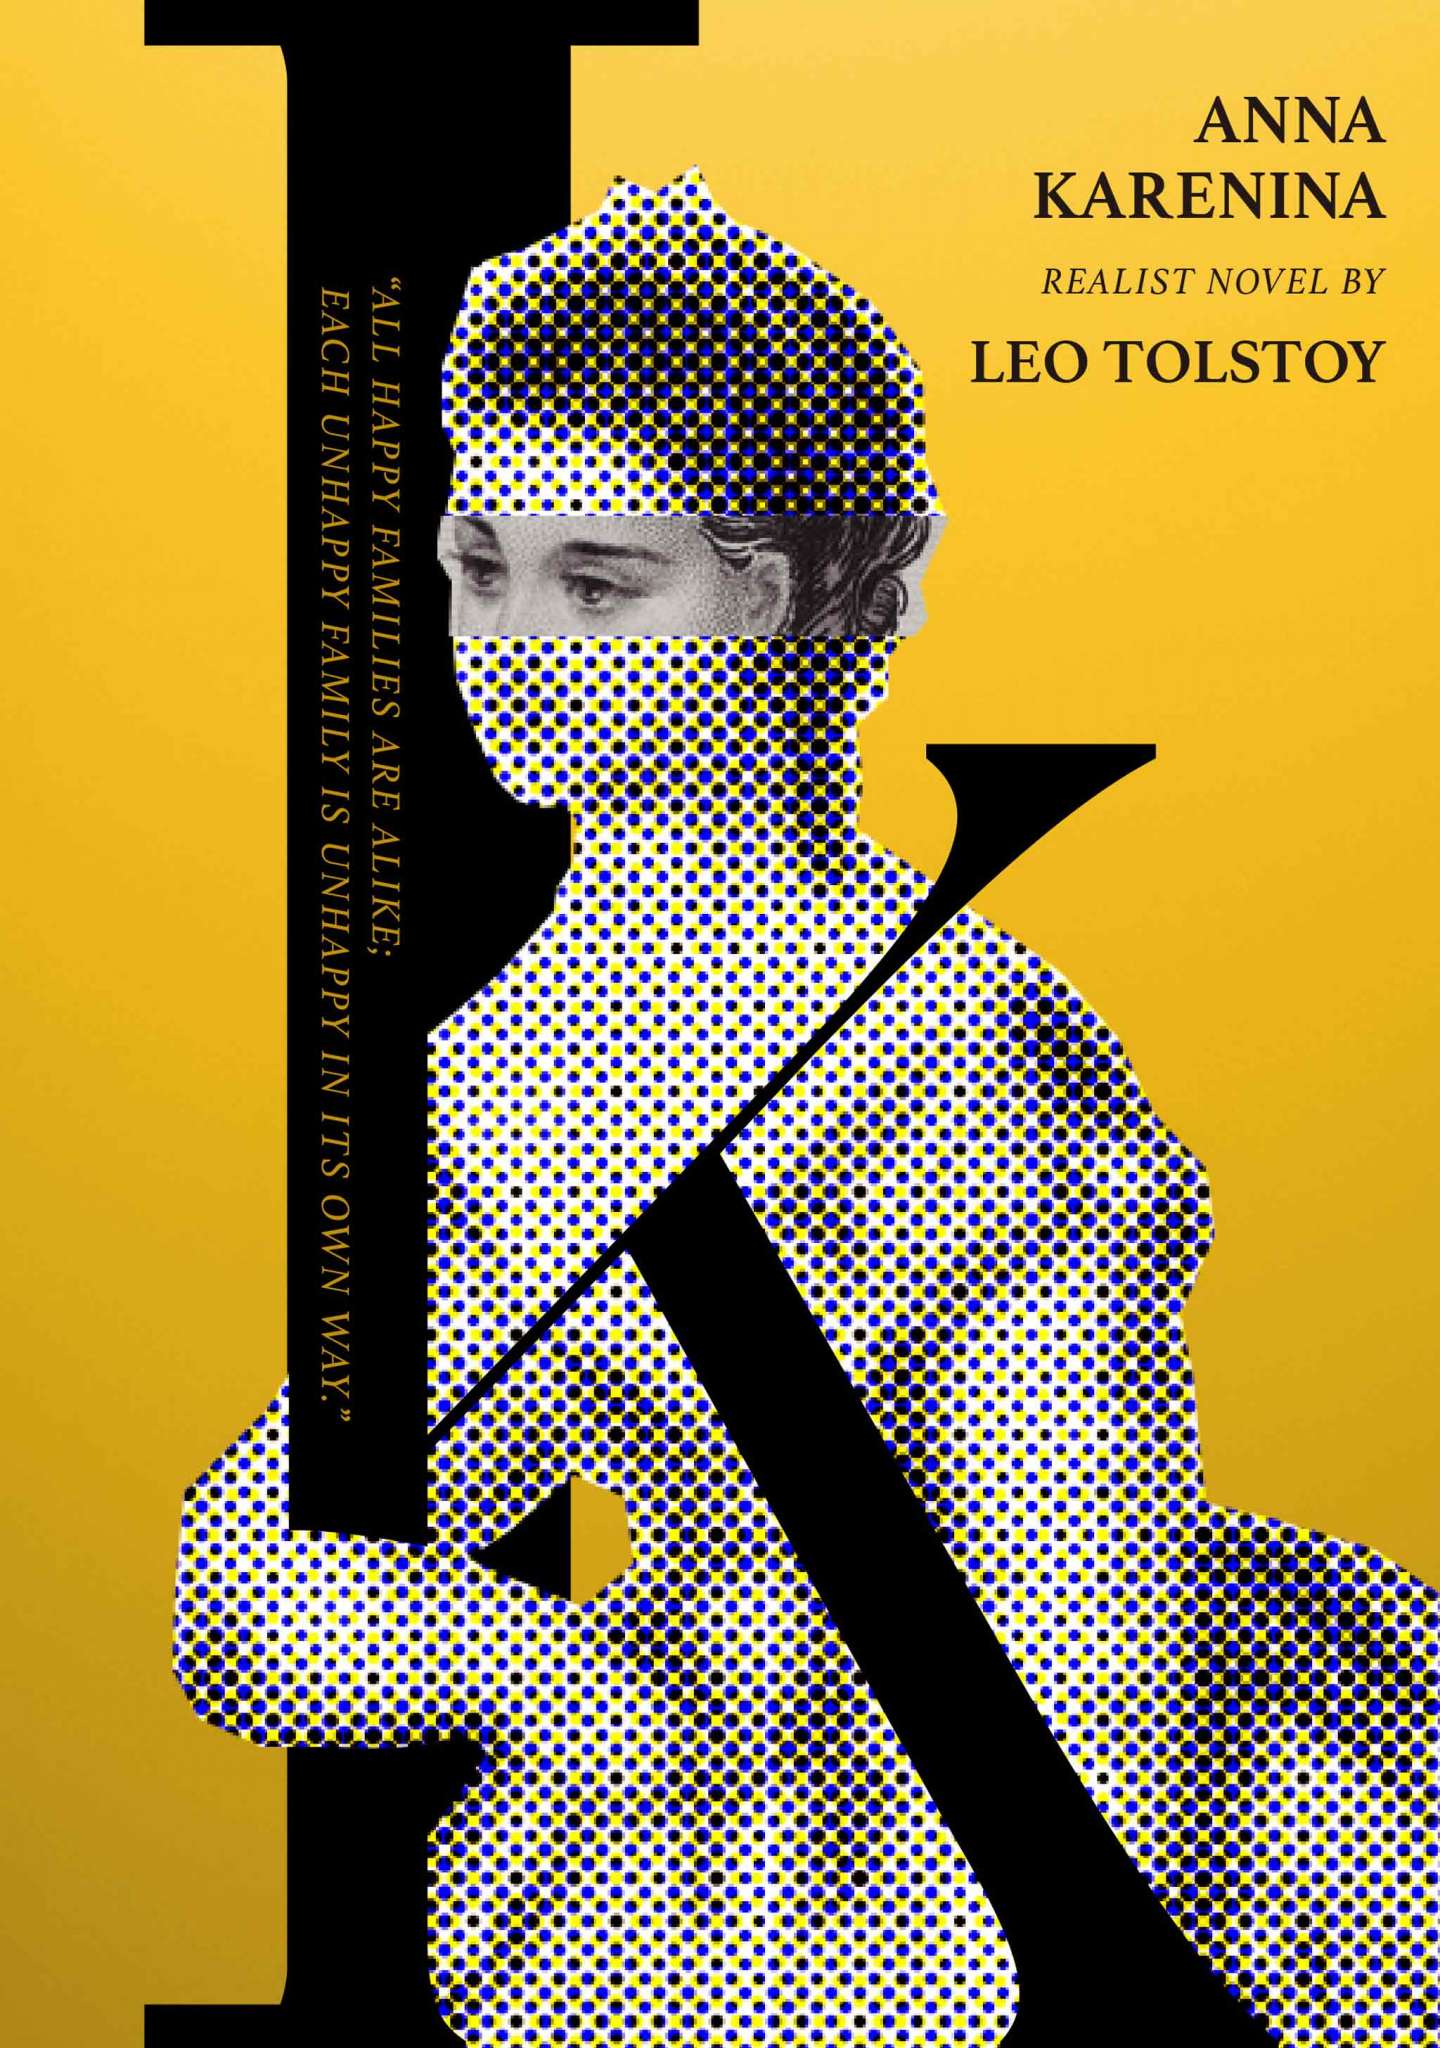 Book Covers of Leo Tolstoy